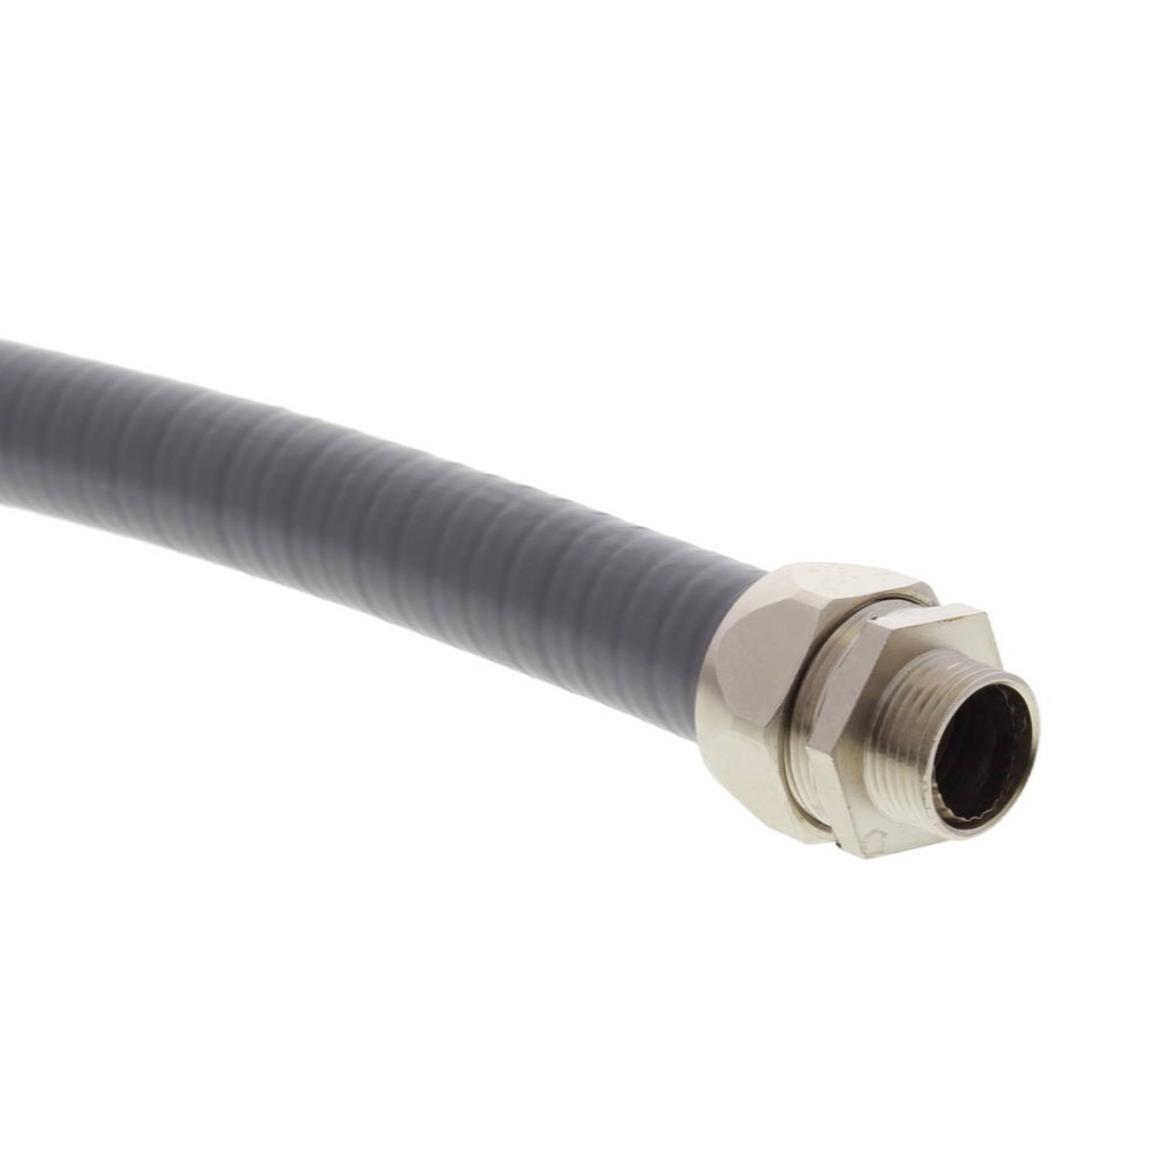 【BMCG-PVC-S-10-LG】T-CONNECTOR FOR CORRUGATED PIPES